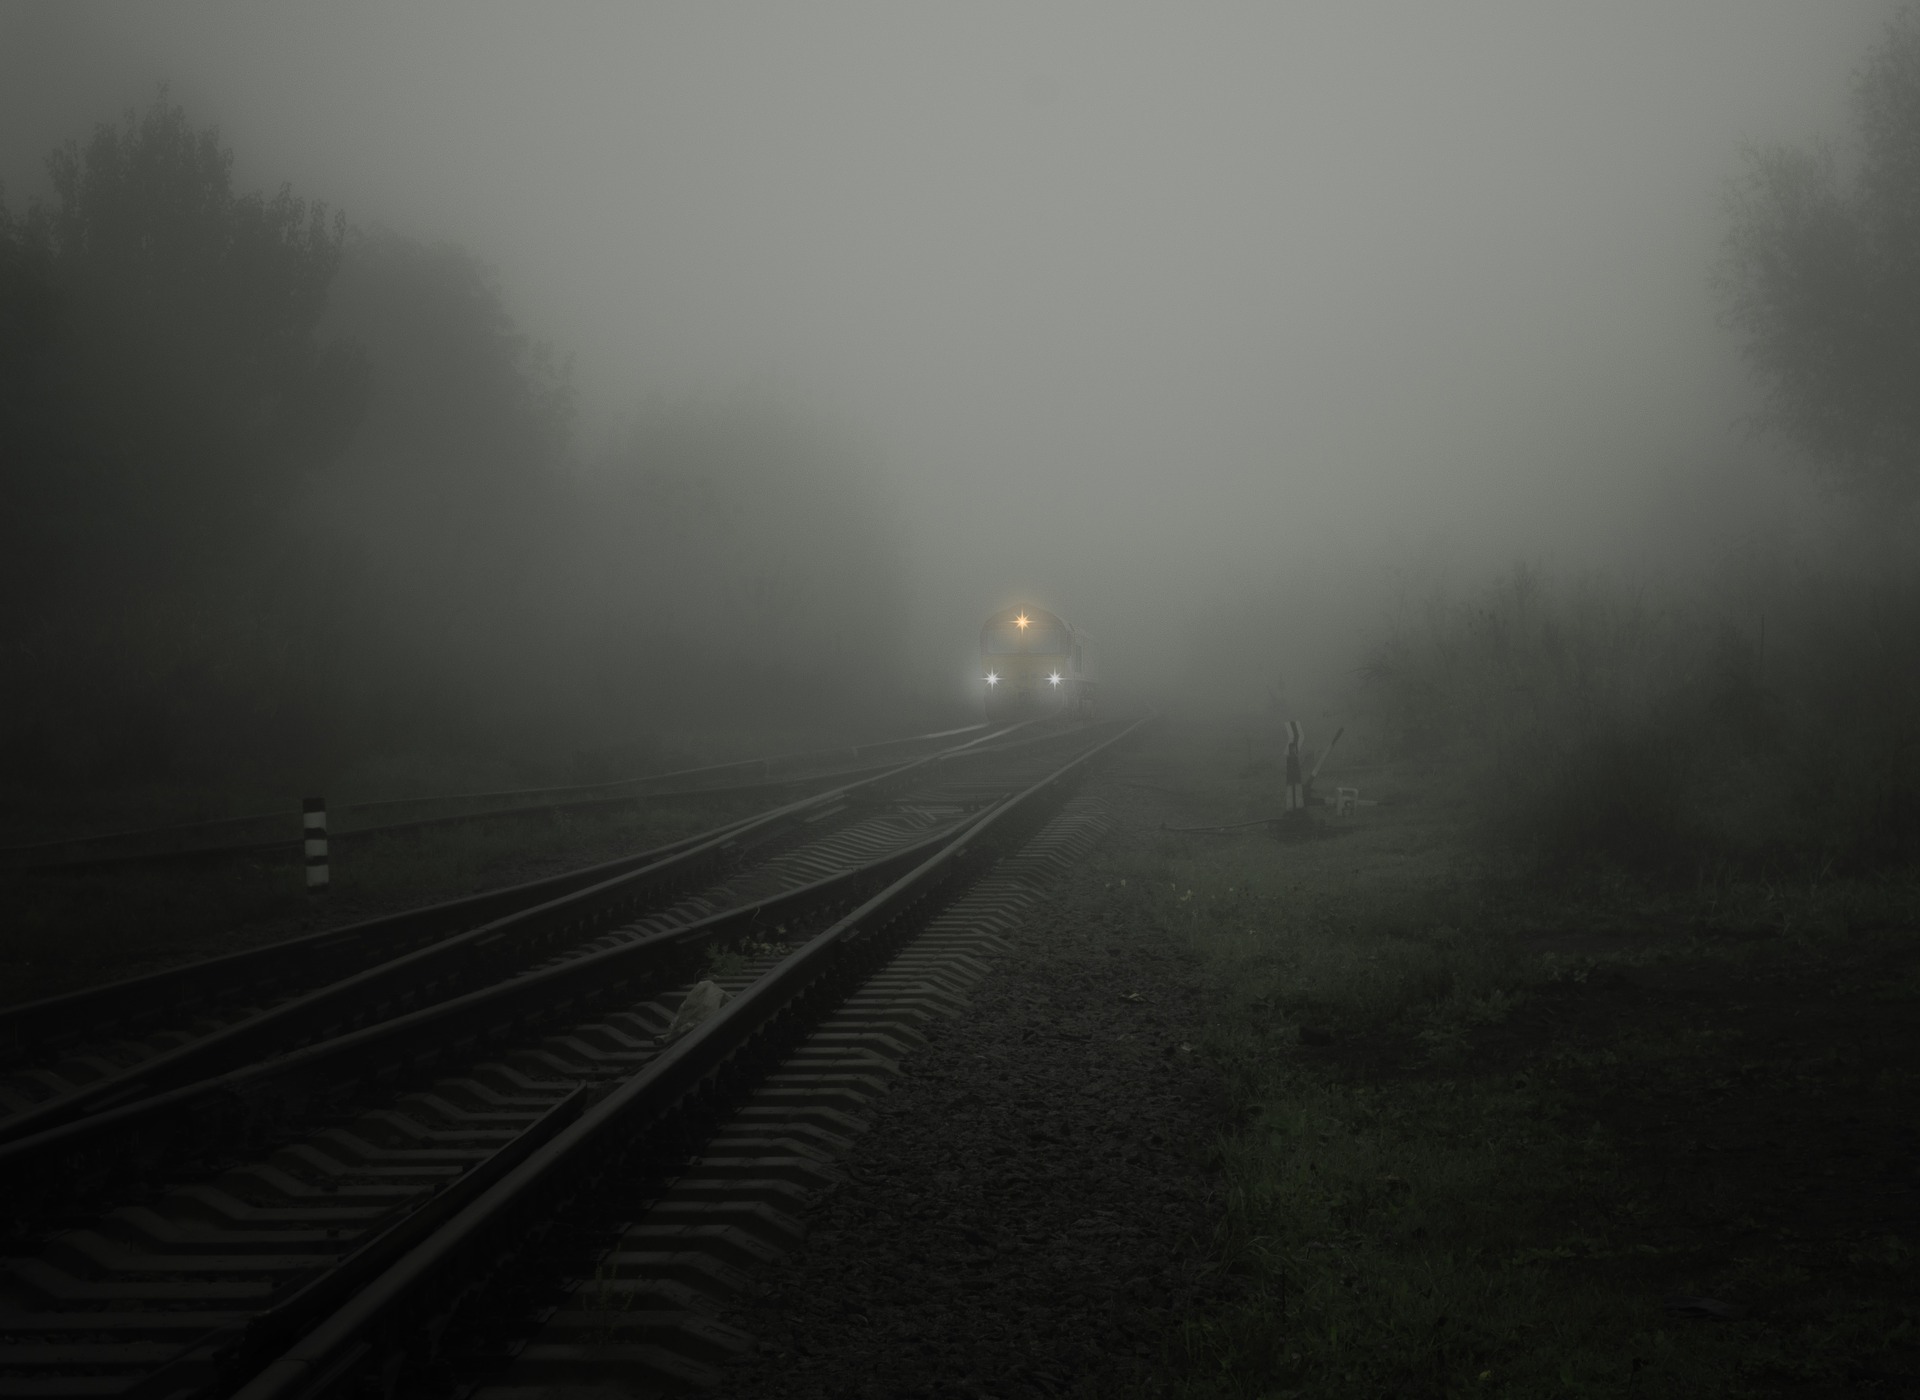 smog on tracks with train approaching